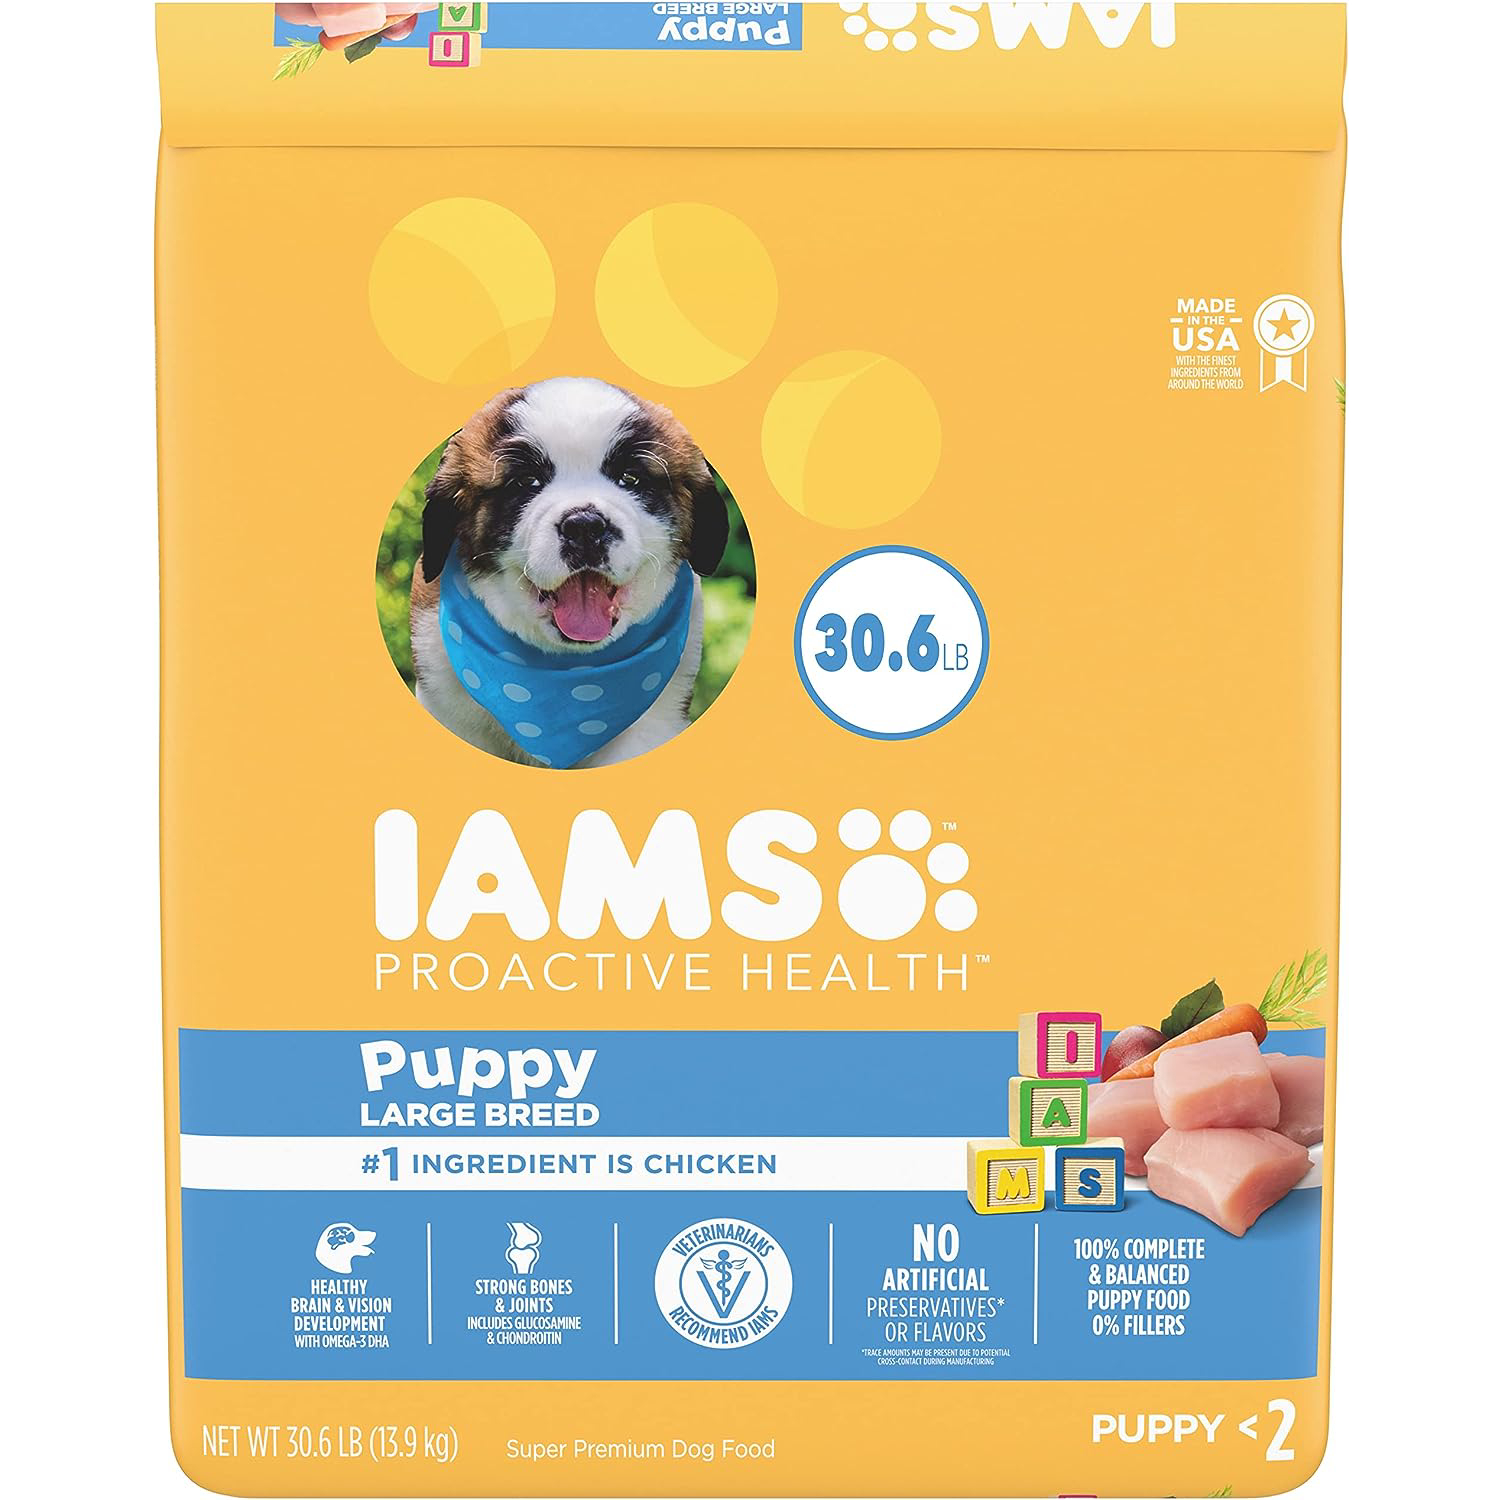 New Project IAMS Smart Puppy Large Breed Dry Dog Food 